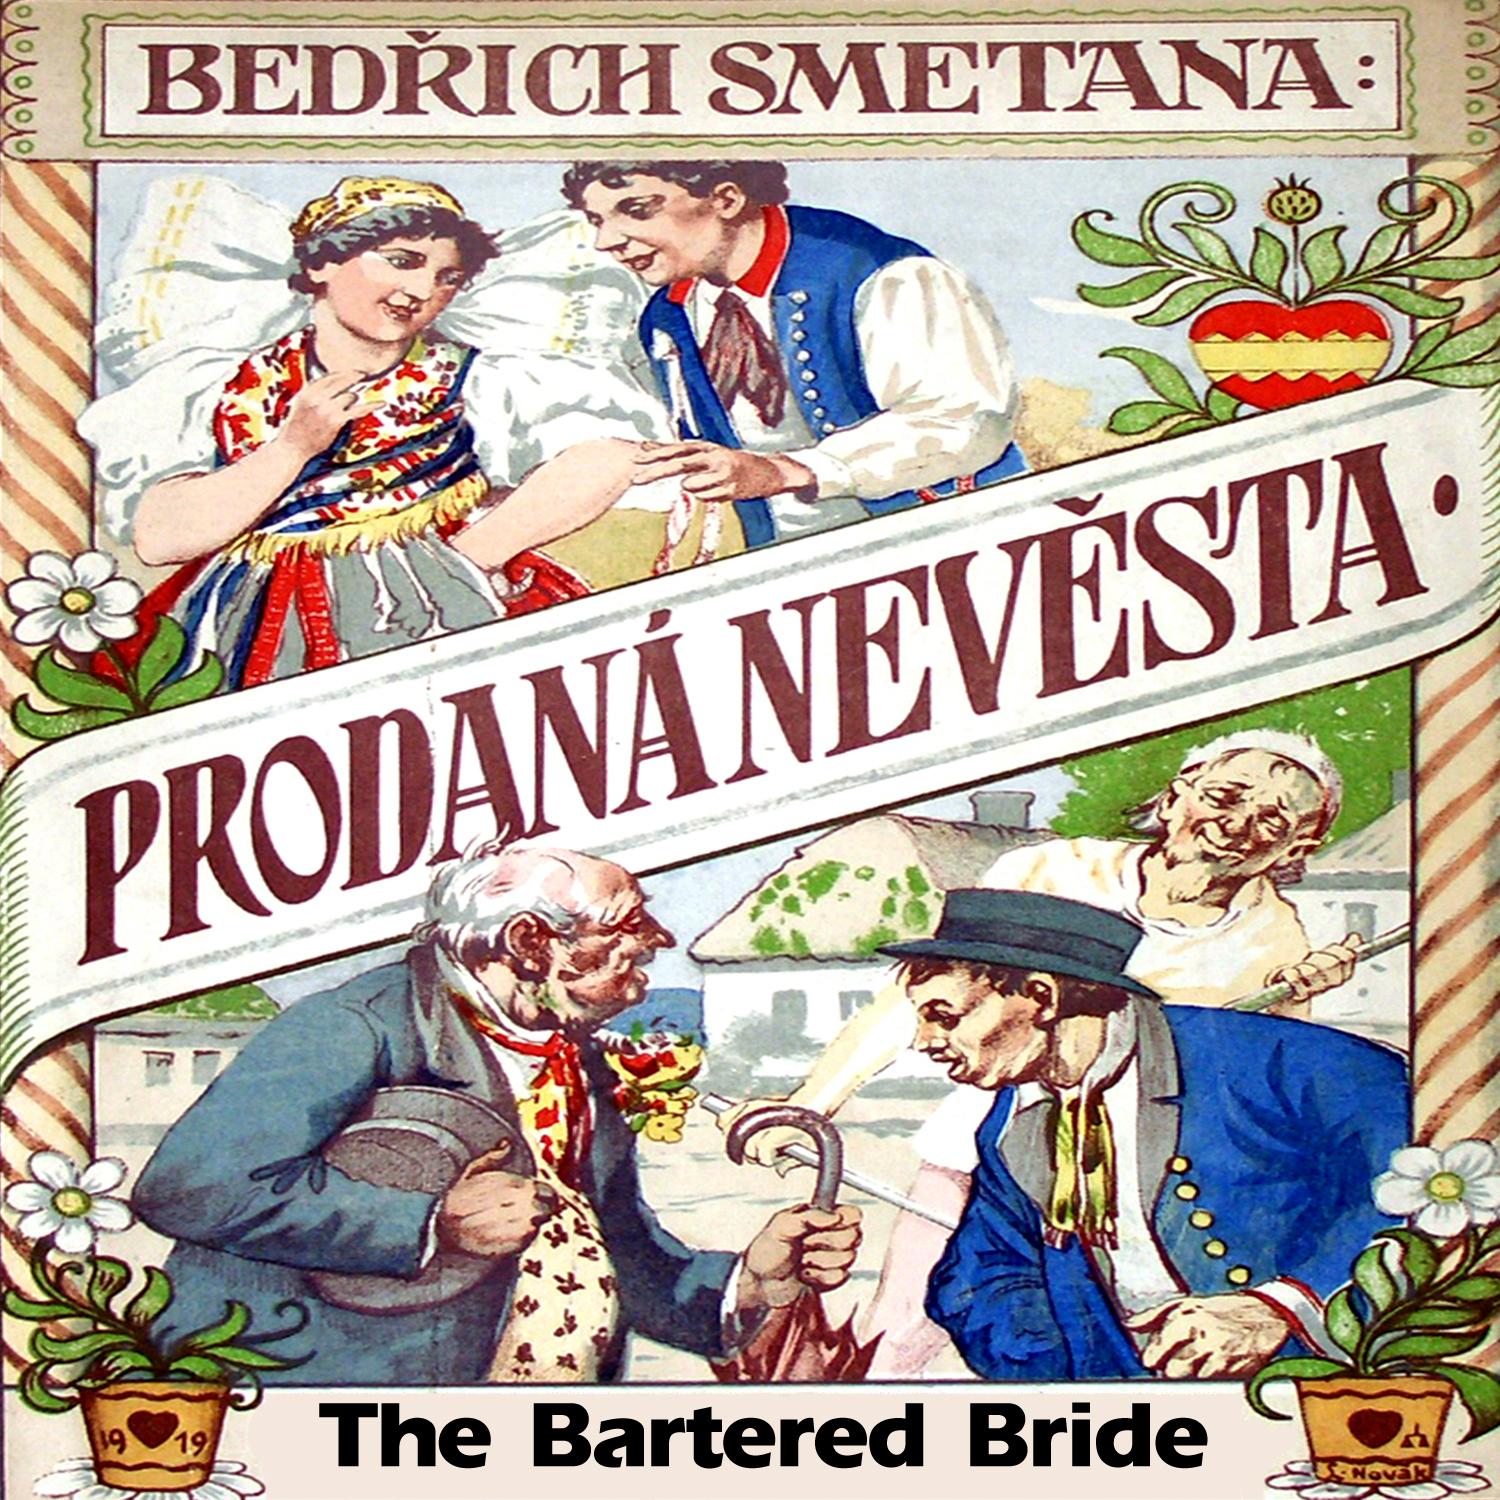 The Bartered Bride, Act III: Dance of the comedians